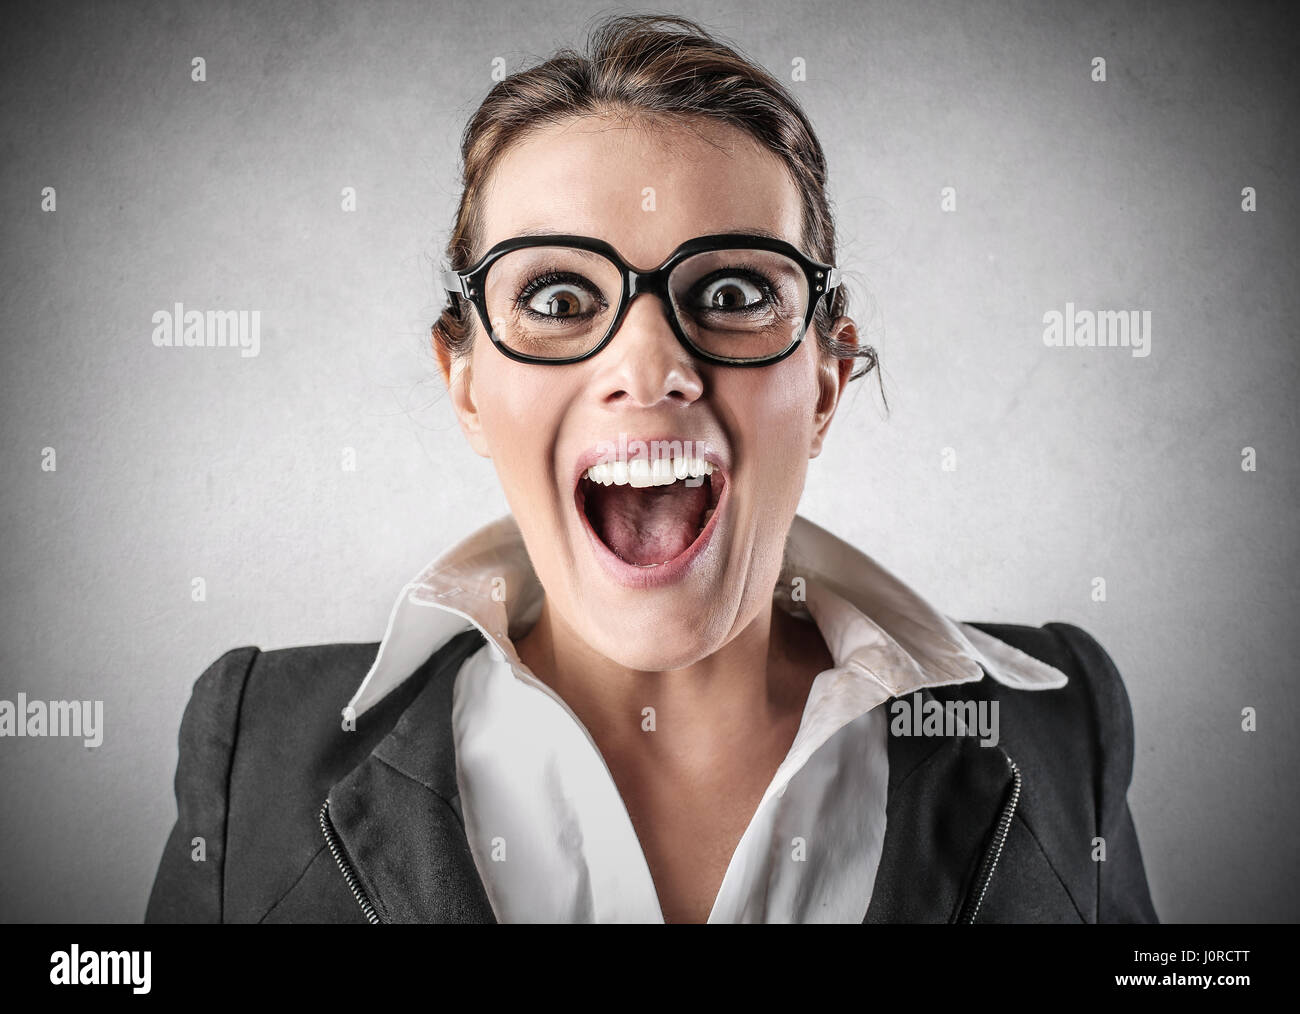 businesswoman being happy and excited Stock Photo